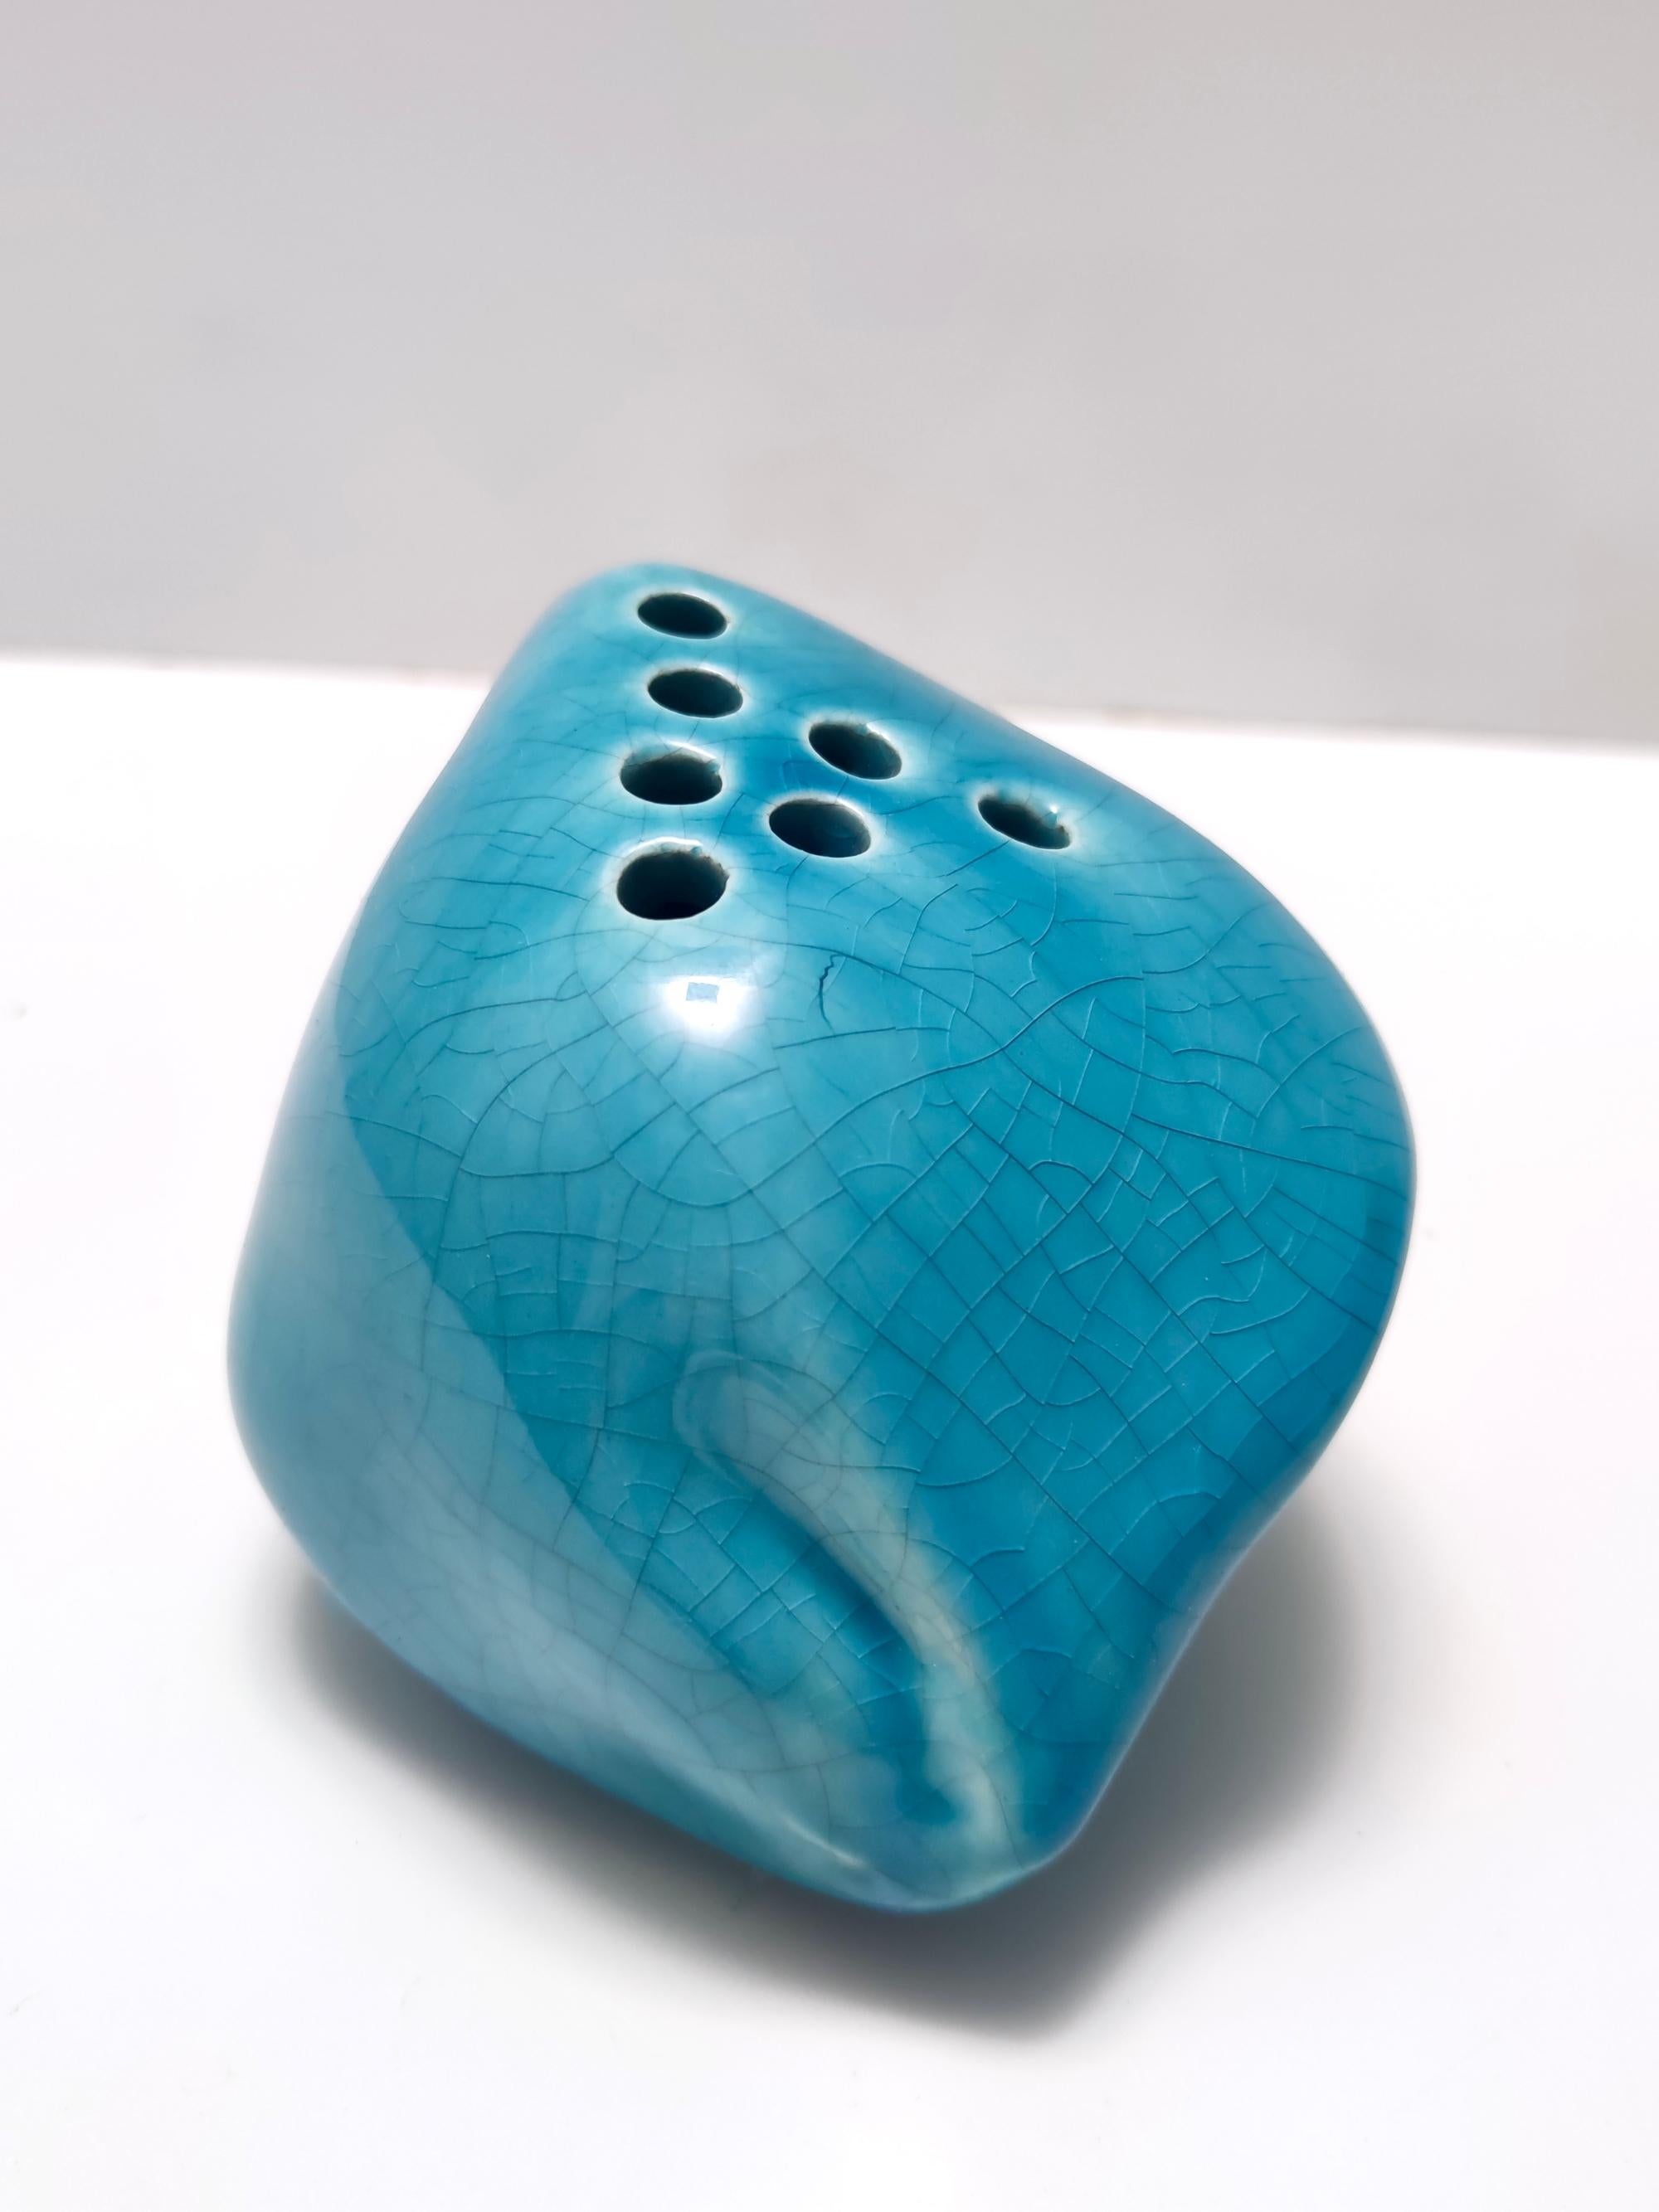 Teal Lacquered Ceramic Tulip Vase by Giacomo Onestini for Ernestine Salerno For Sale 2